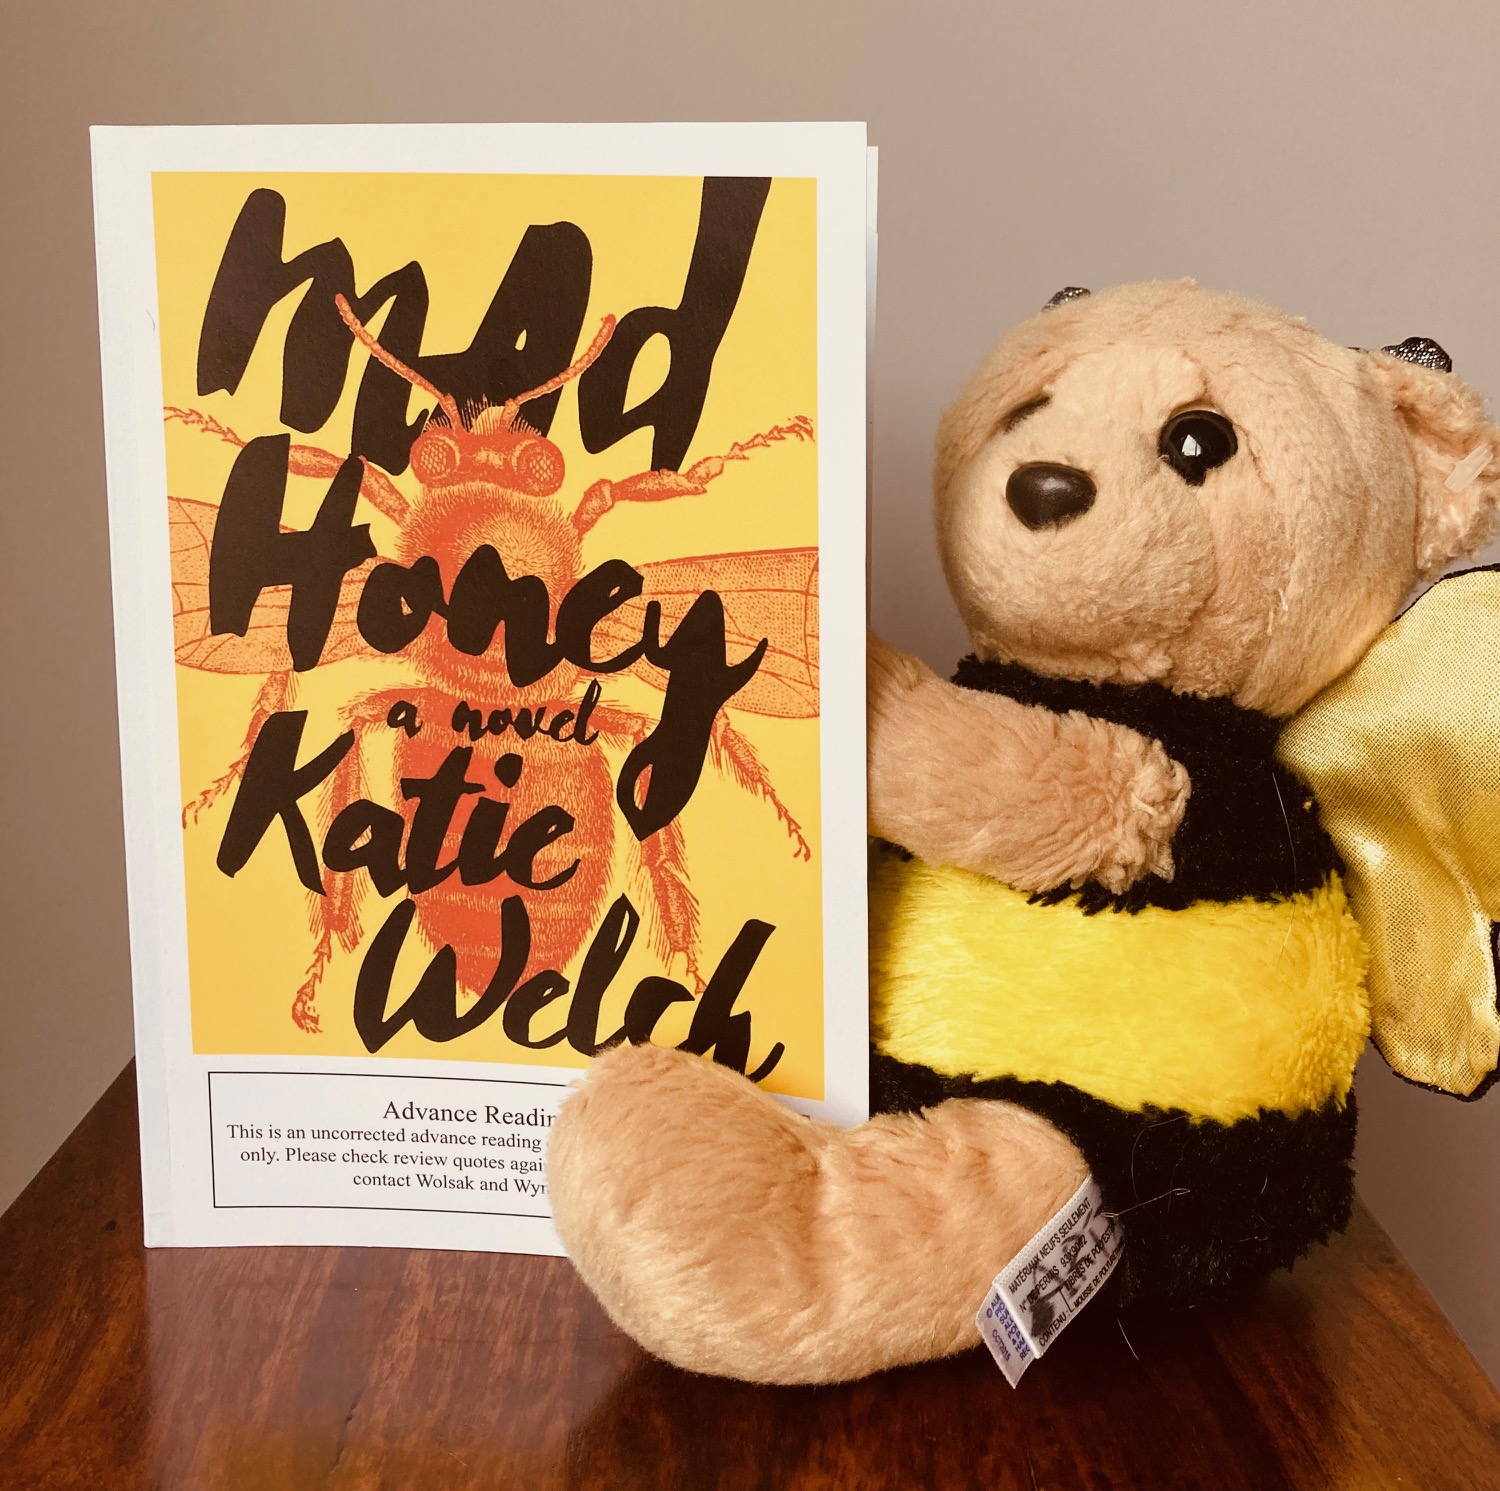 Mad Honey by Katie Welch book pictured with a stuffed bee bear